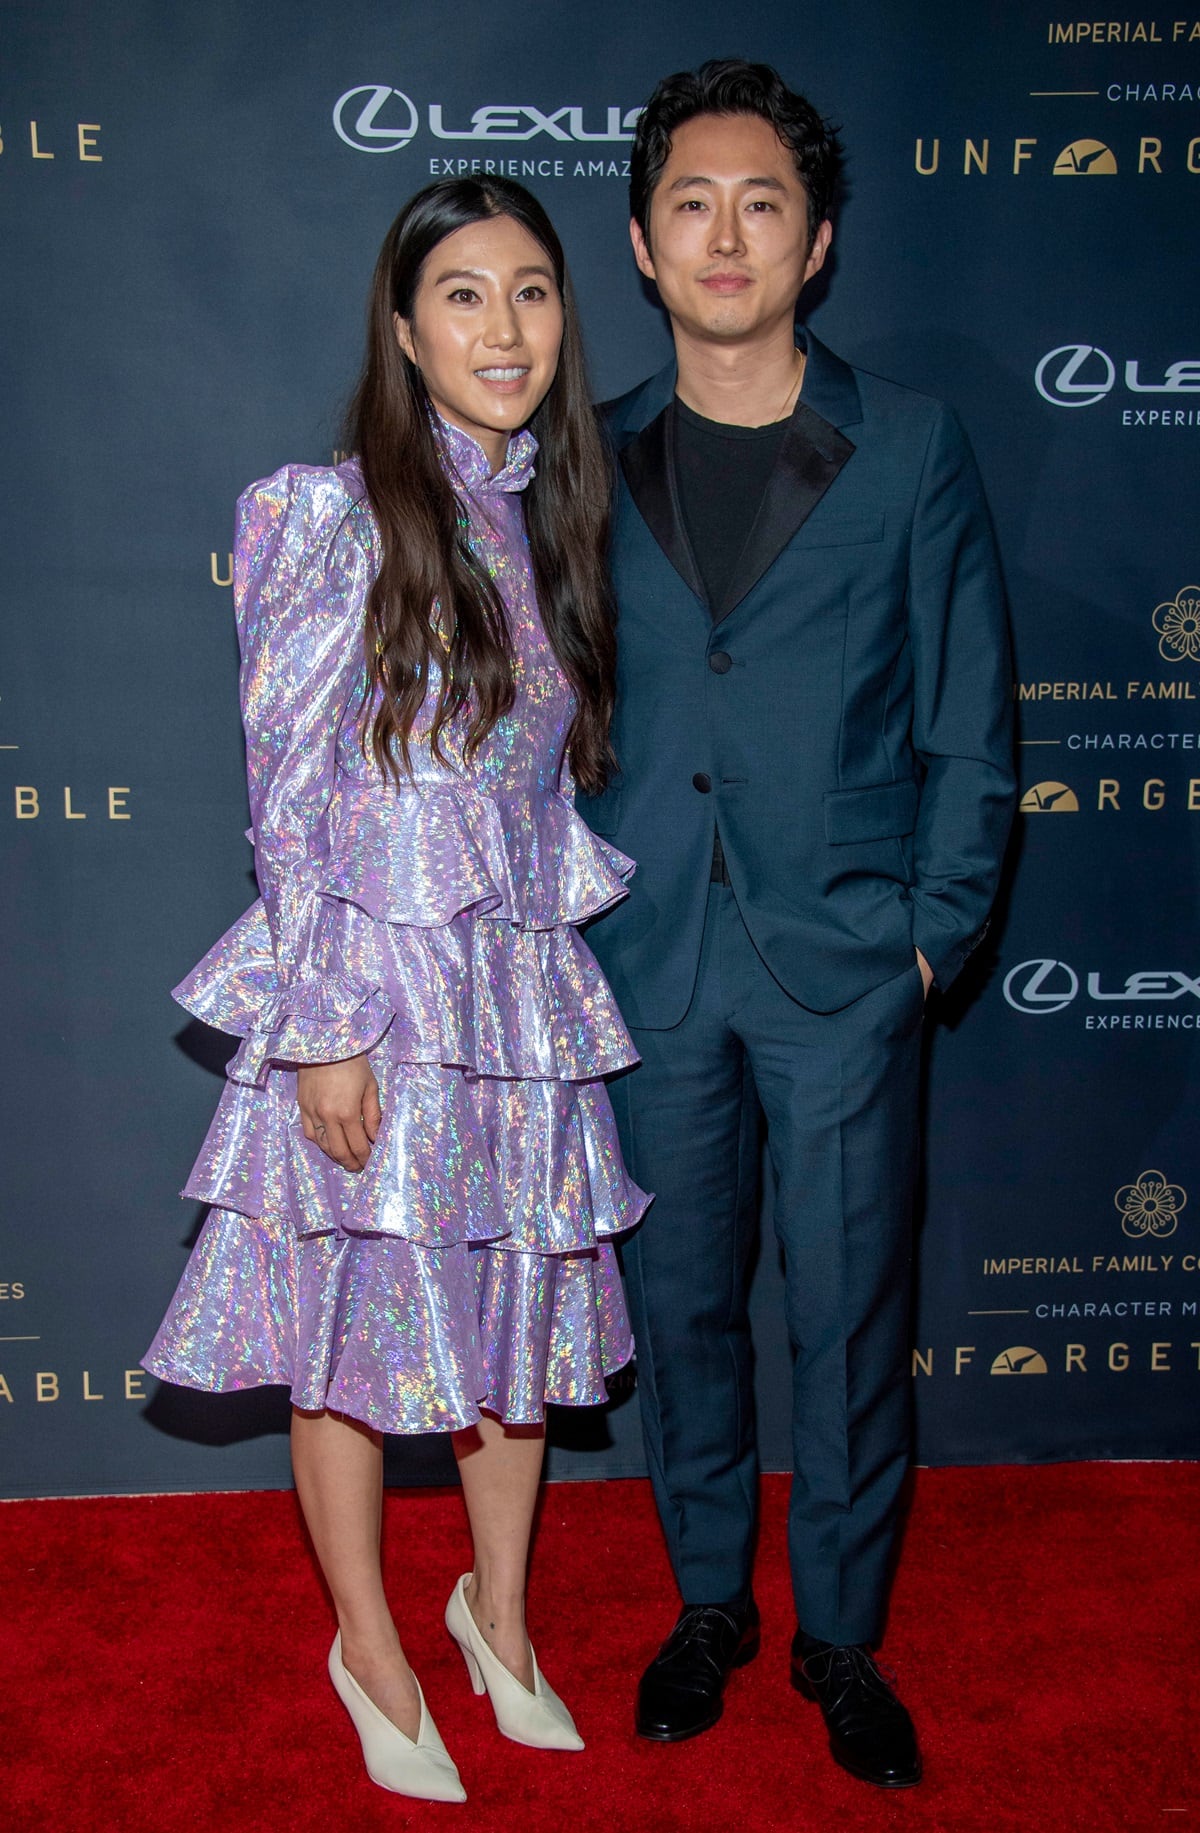 Steven Yuen and his wife Joana Pak, whom he met in Chicago in 2009 while still in college, arrive for the 18th Annual Unforgettable Gala